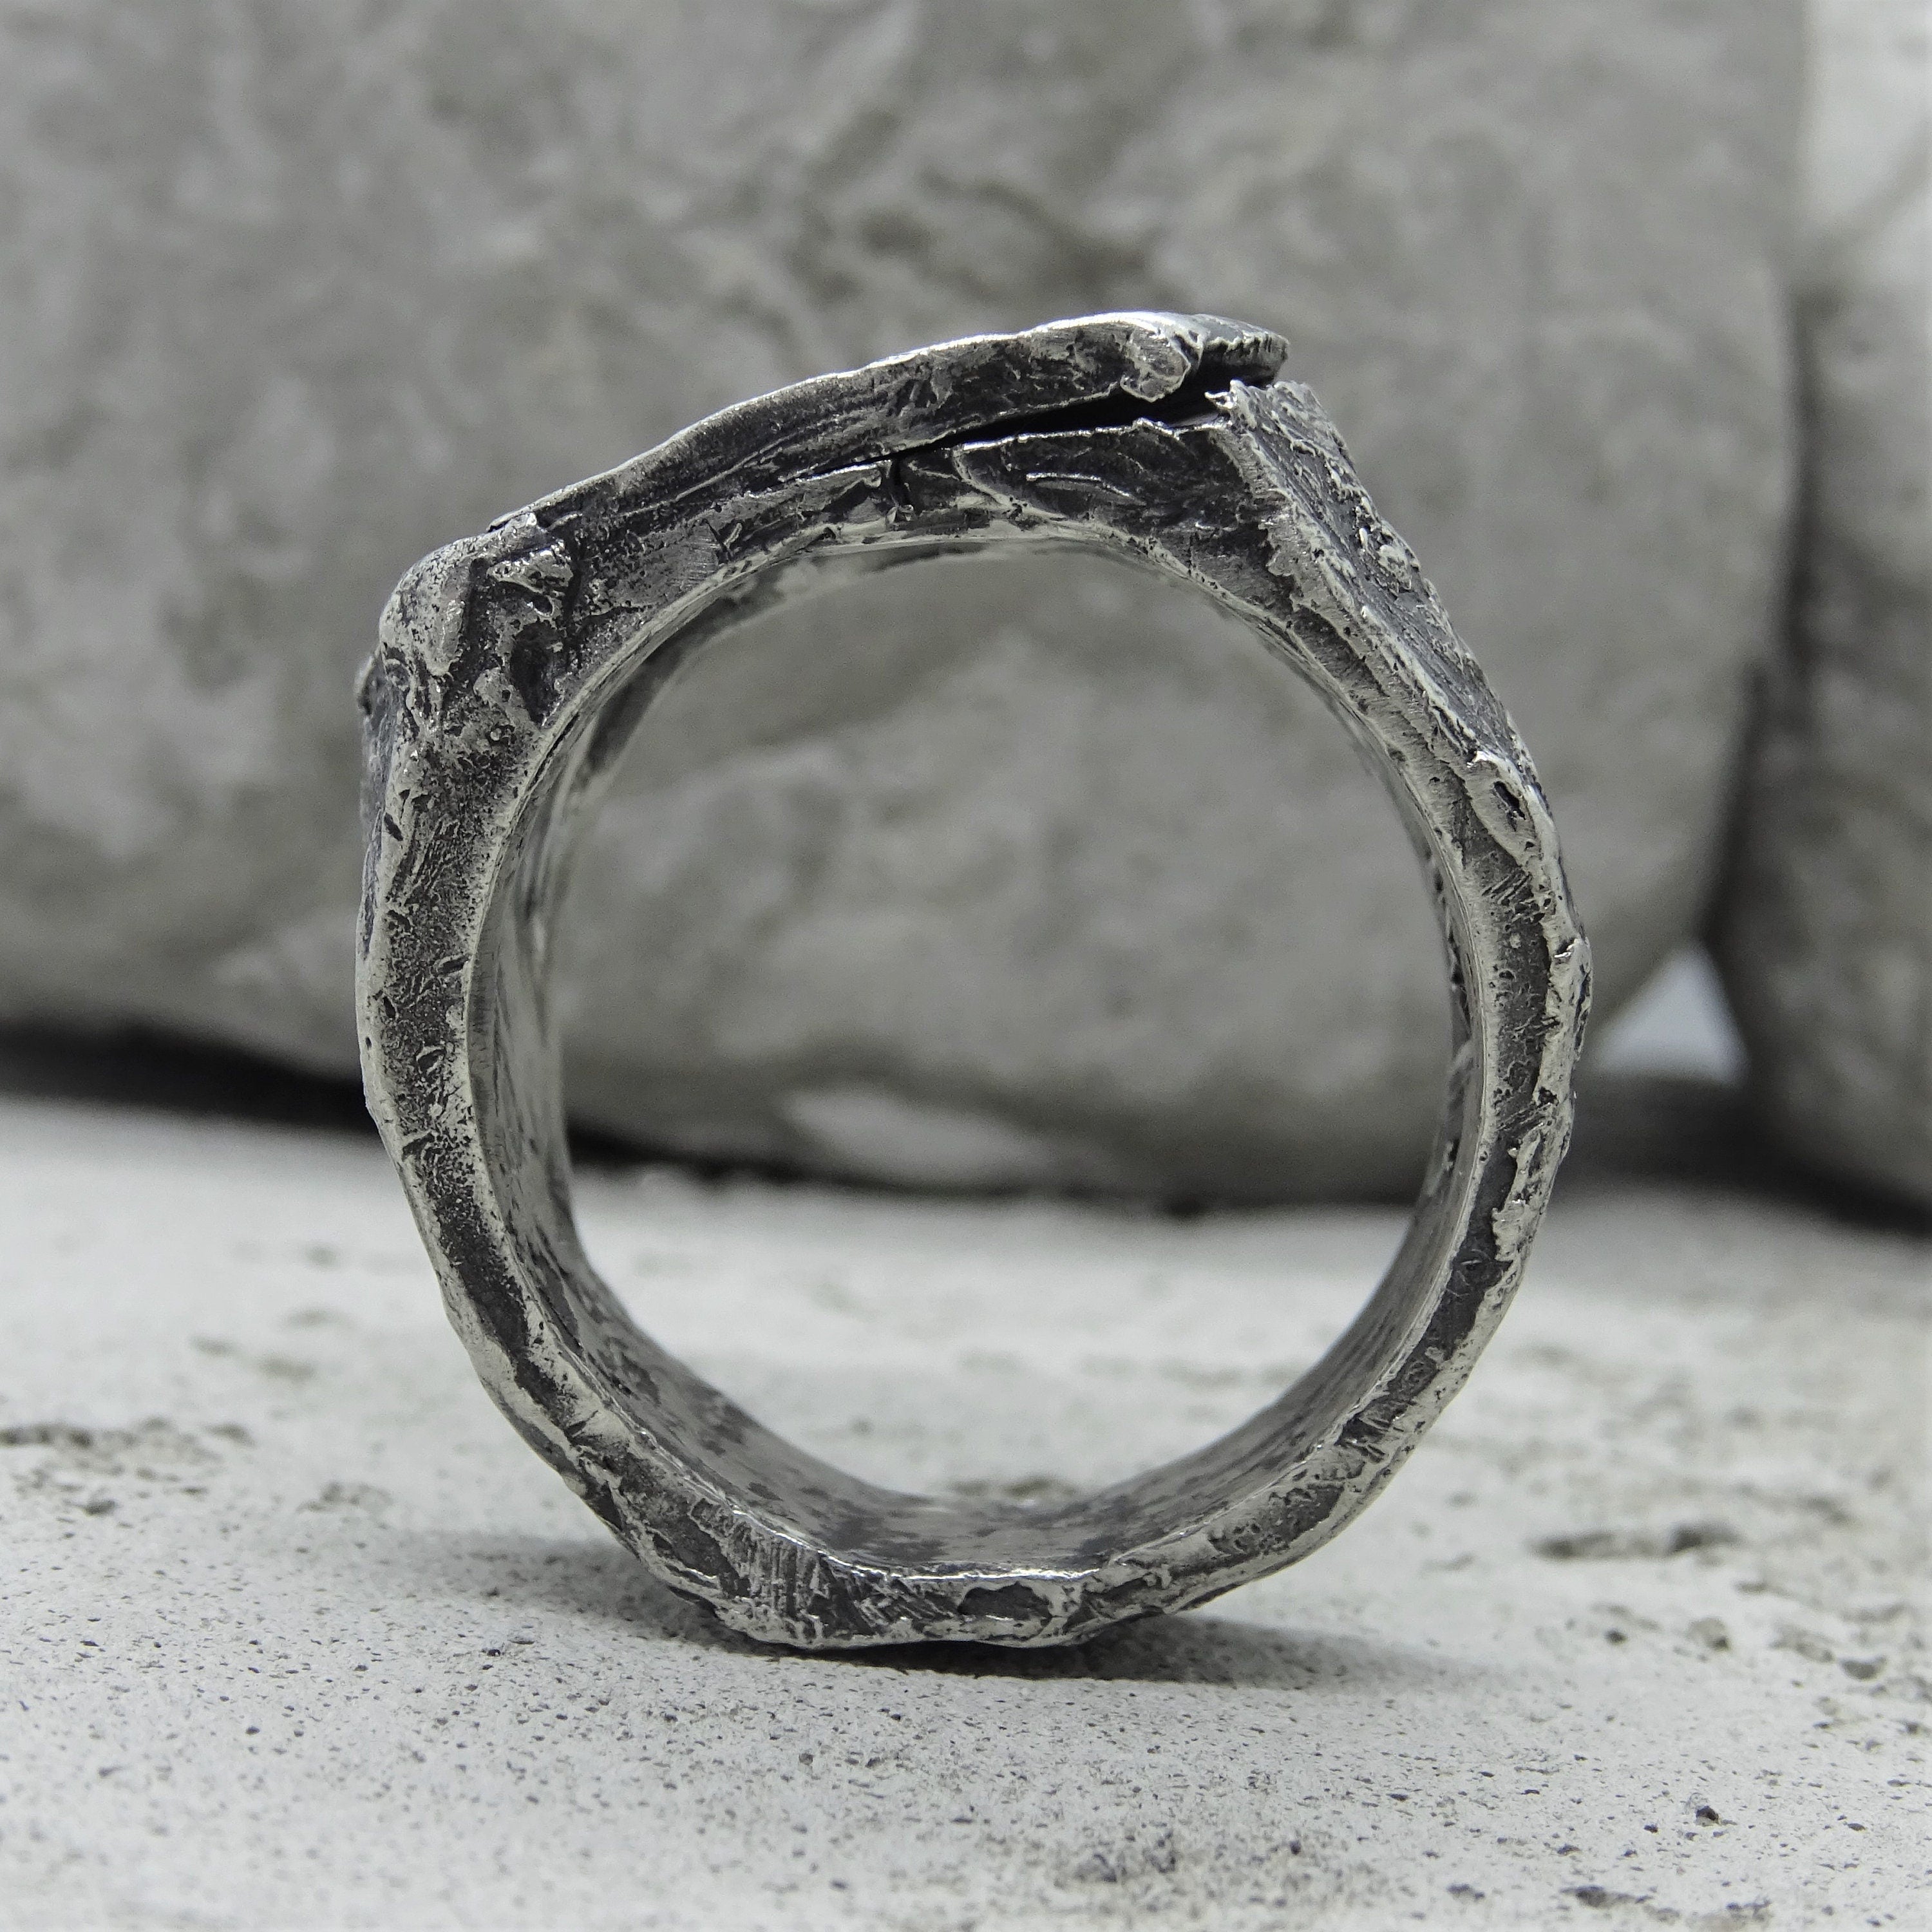 Crack ring- massive ring with crack and unusual texture